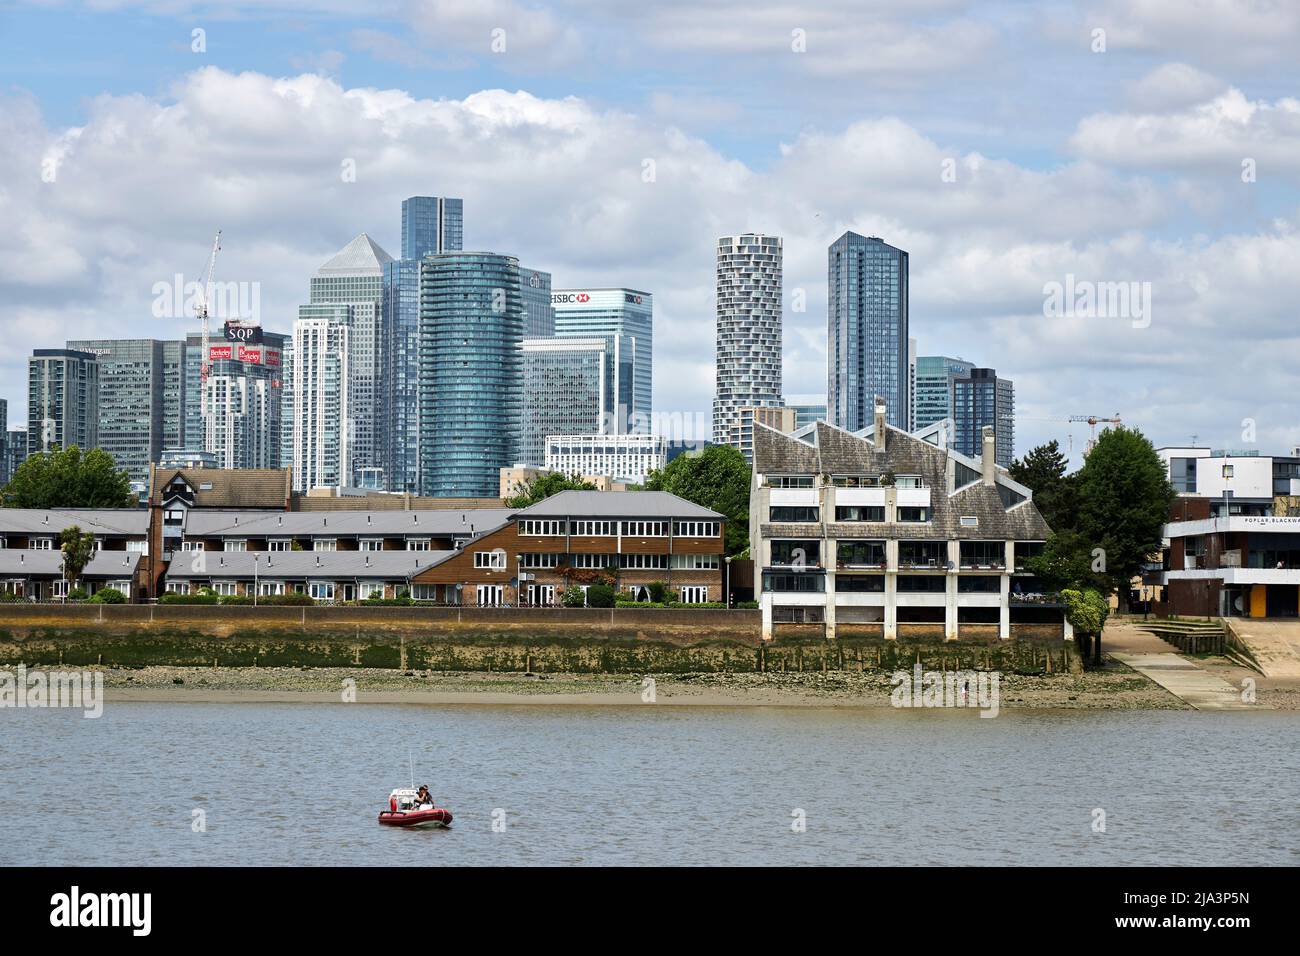 Isle of Dogs, London viewed from across the Thames in Greenwich. Stock Photo